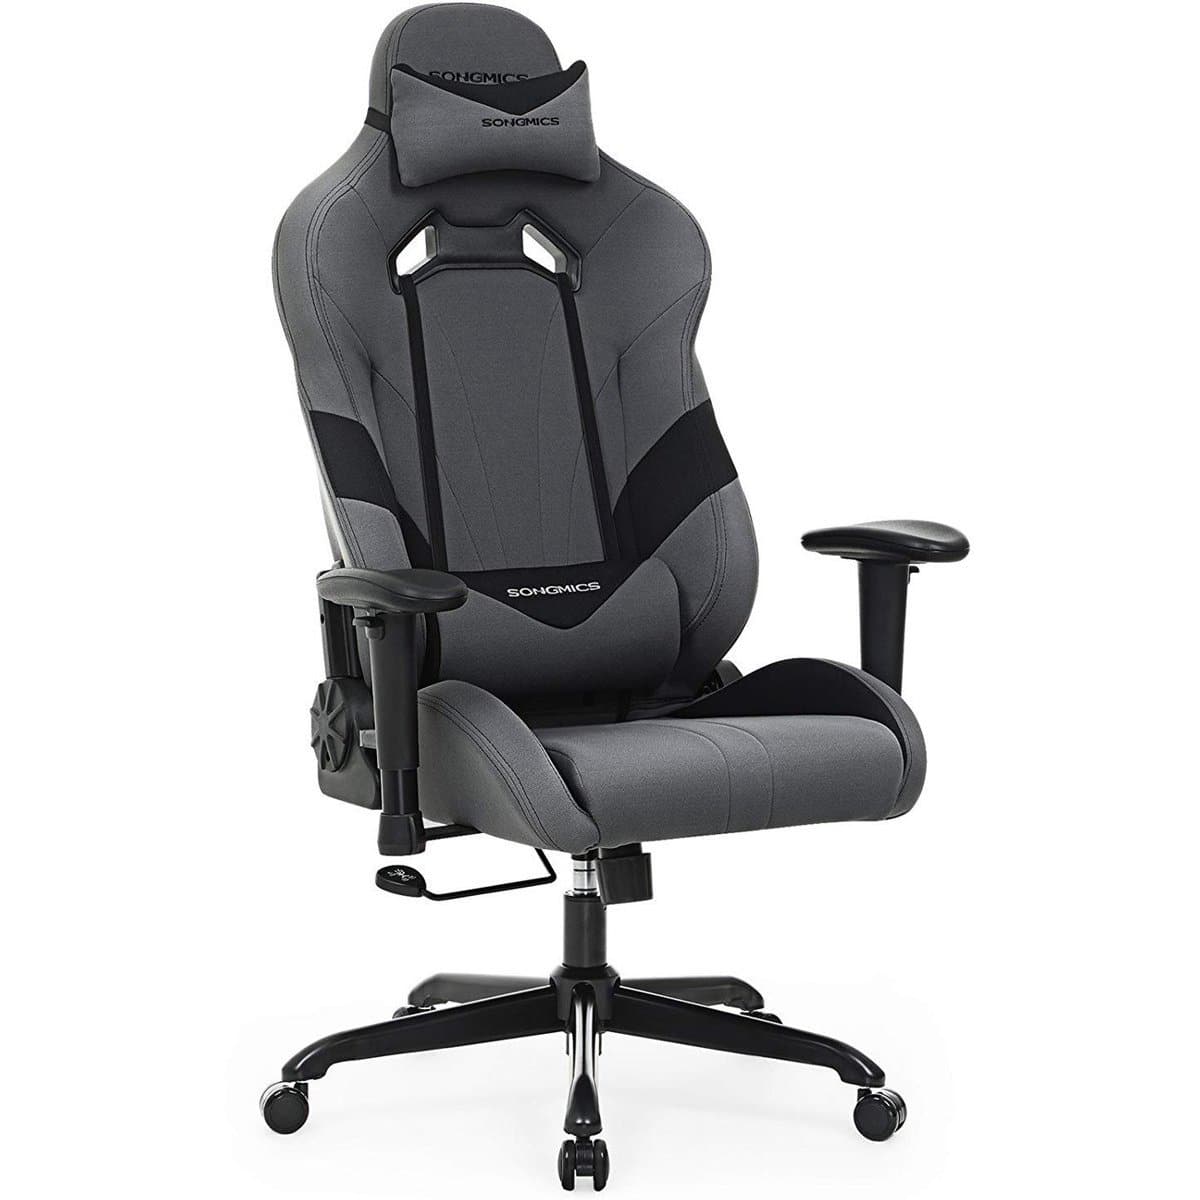 Nancy's Loyola Gaming Chair - Office Chair With Adjustable Armrests - Chair With Pillow - Gaming Chairs